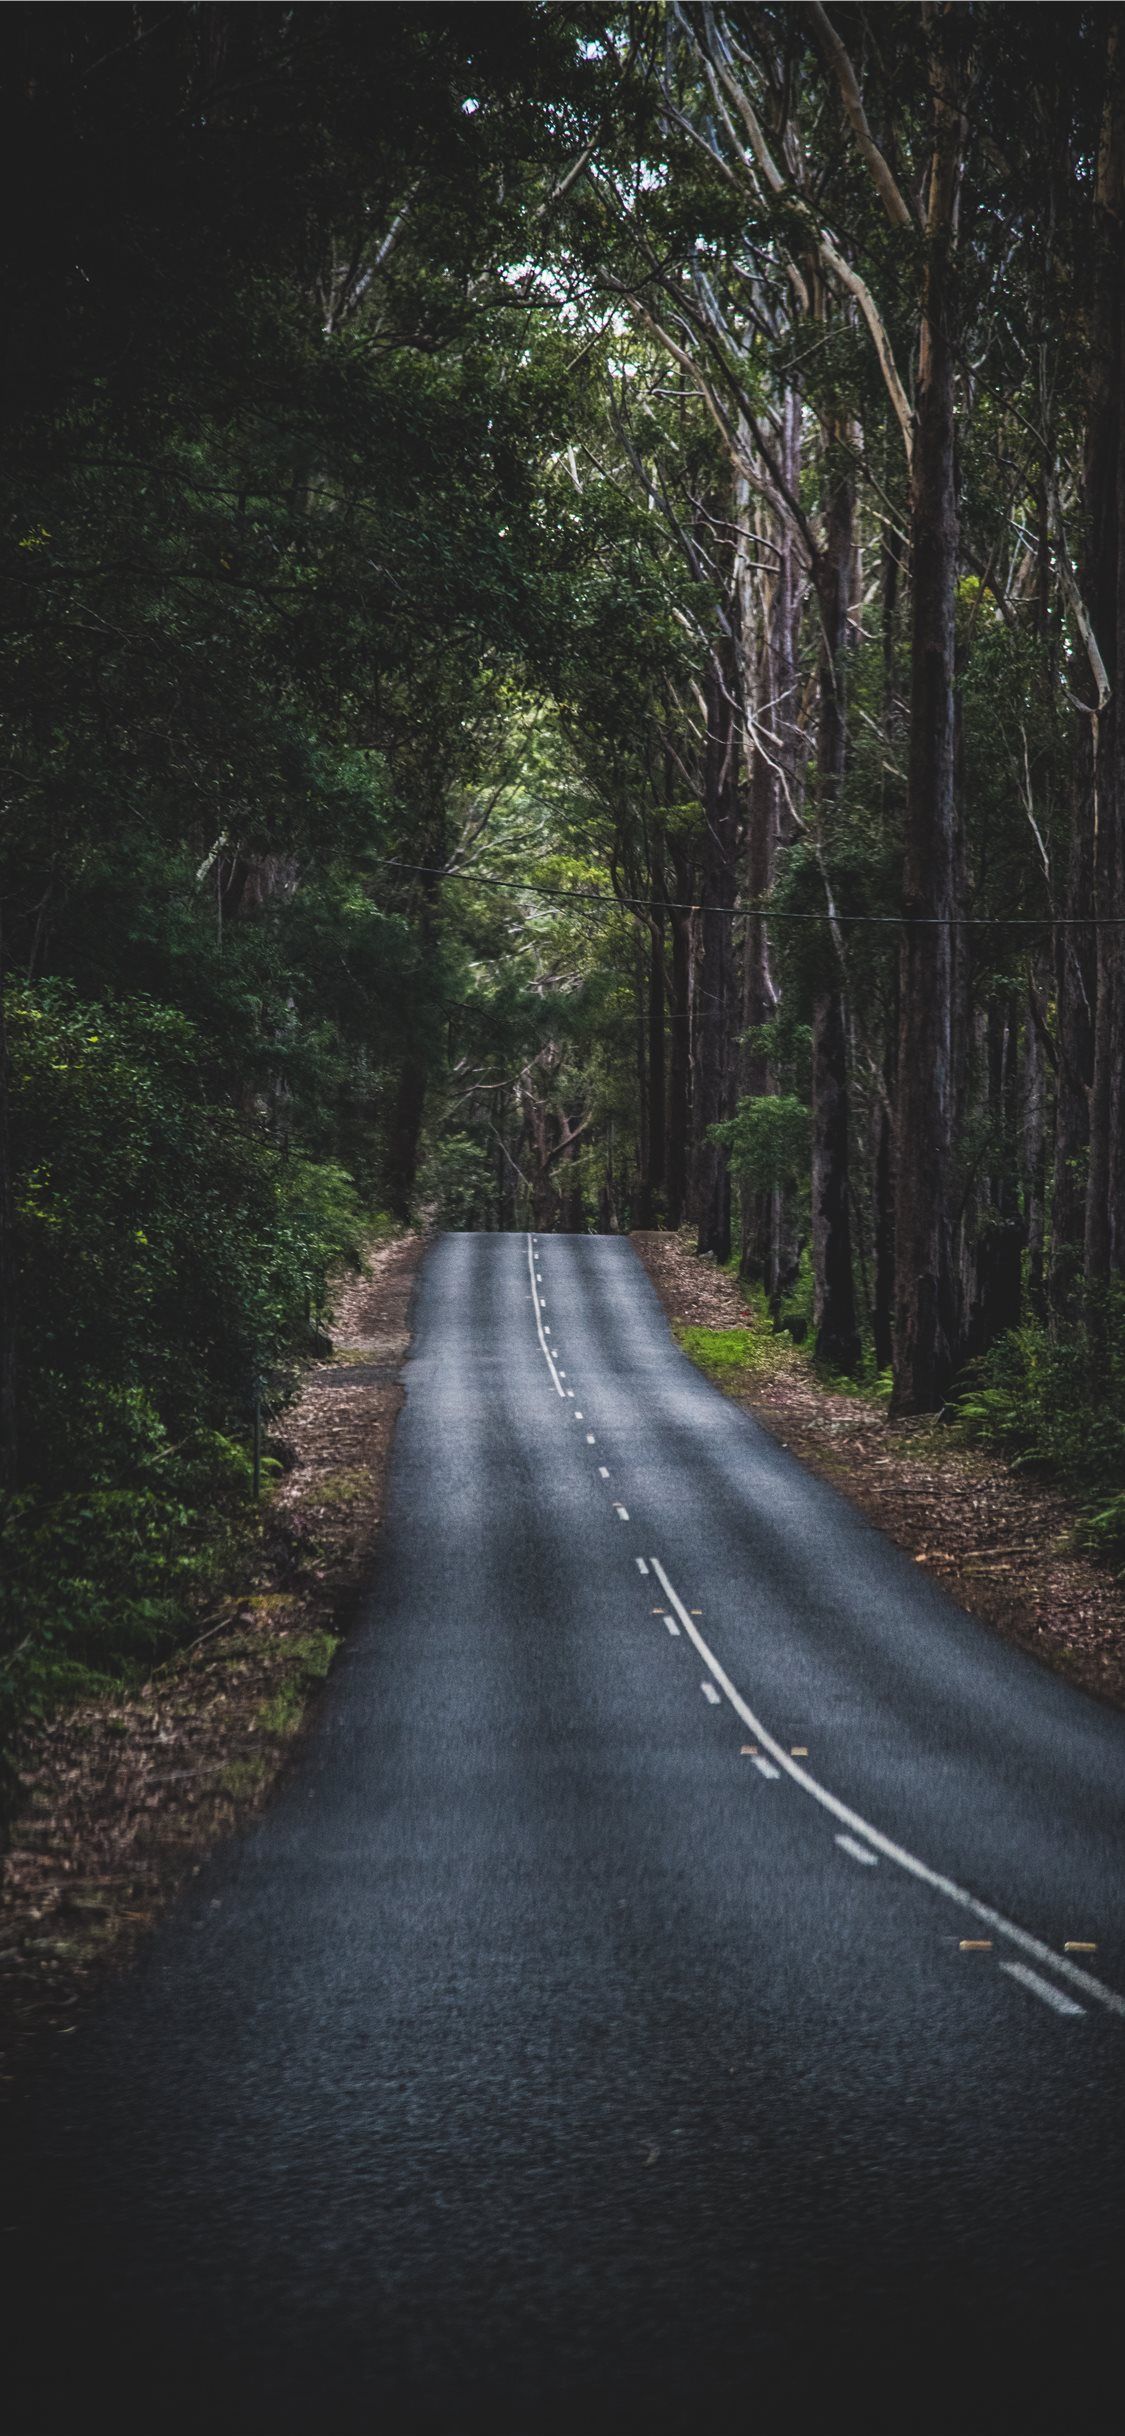 Long Mountain Road #road #tarmac #asphalt #highway #freeway #plant #tree #iPhone11Wallpaper. Cool background, Landscape, Background